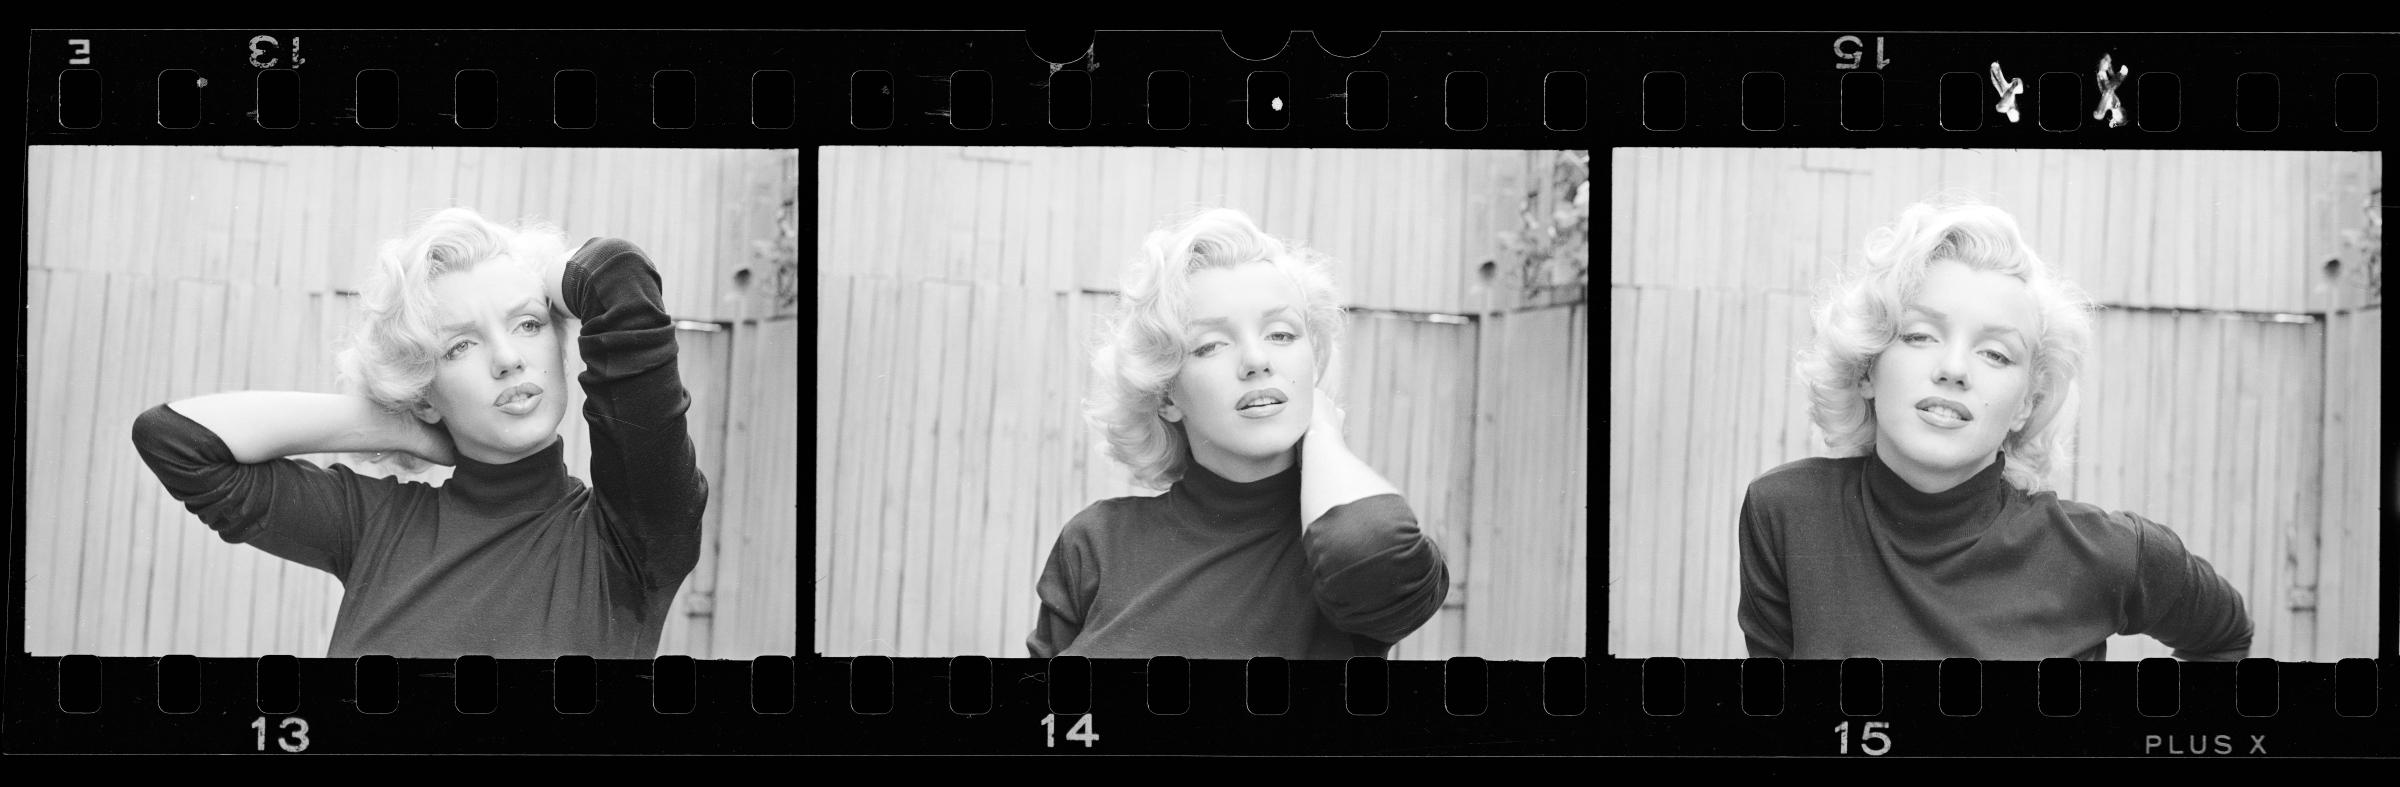 Images from the contact sheet for Alfred Eisenstaedt's classic 1953 shoot with Marilyn Monroe.